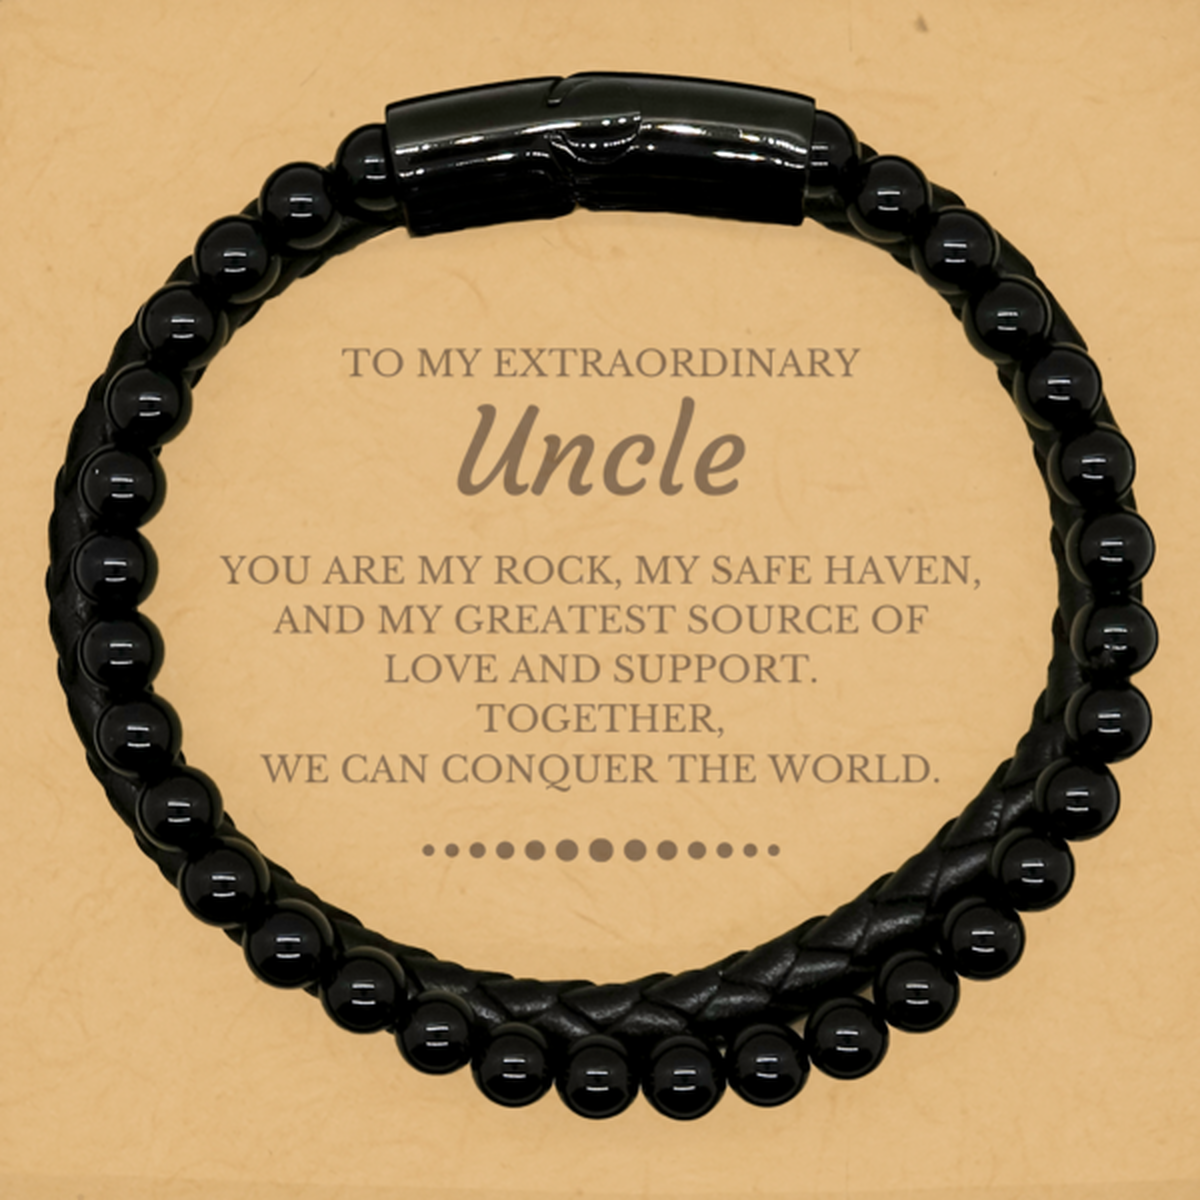 To My Extraordinary Uncle Gifts, Together, we can conquer the world, Birthday Stone Leather Bracelets For Uncle, Christmas Gifts For Uncle